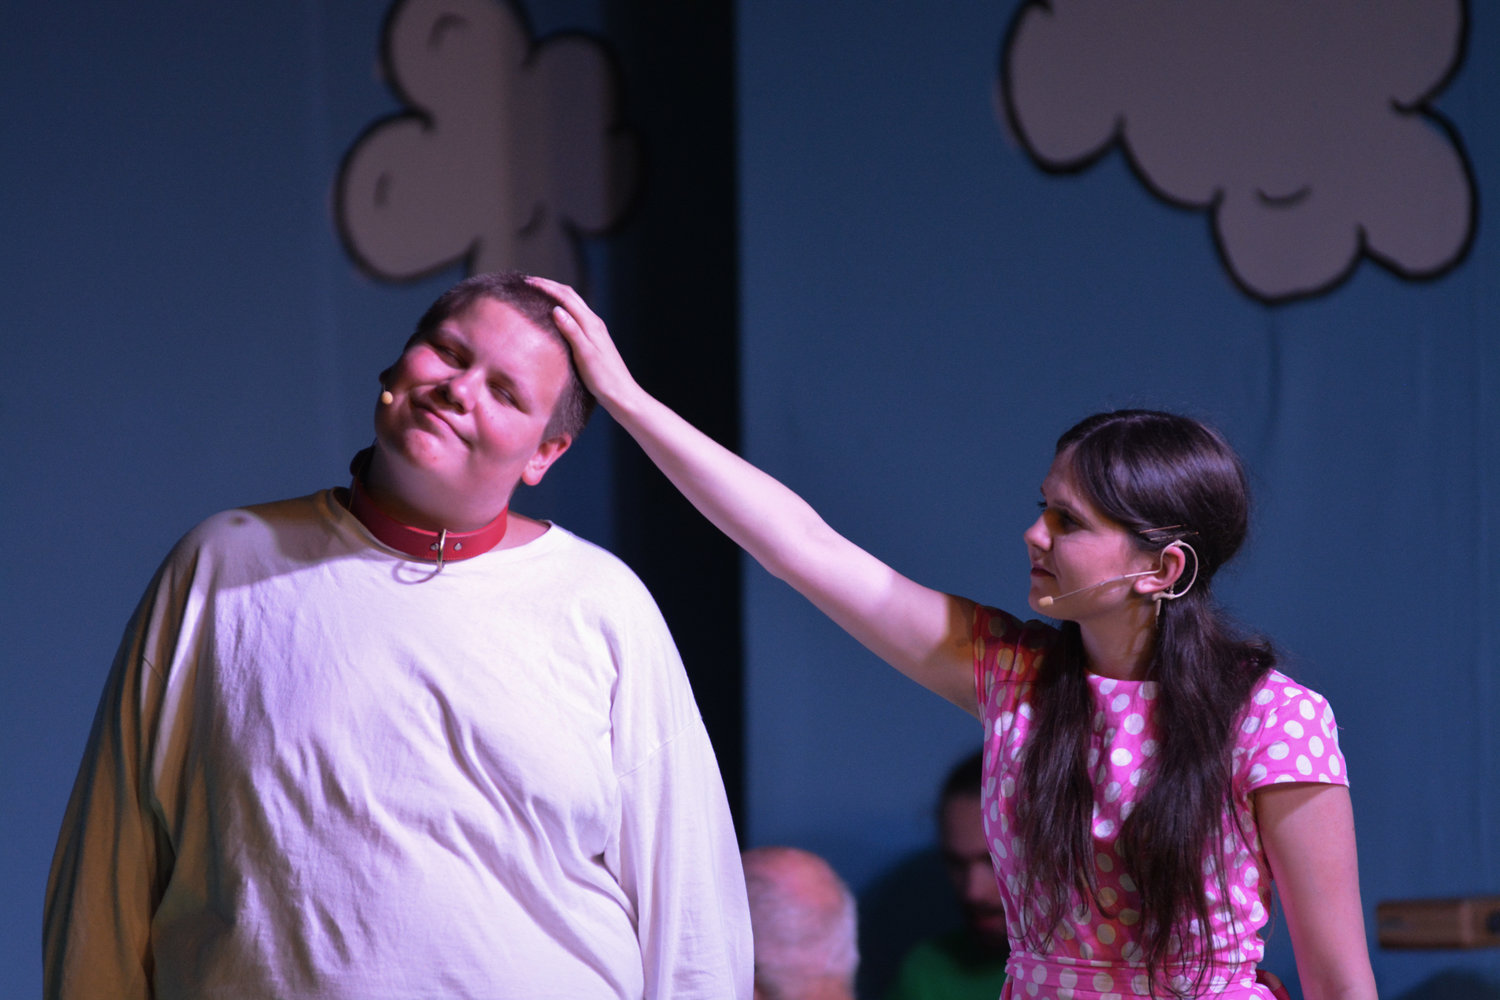 An actress portraying Sally Brown gives a pat on the head to Snoopy in a scene during “You’re a Good Man, Charlie Brown” on Thursday, July 28.